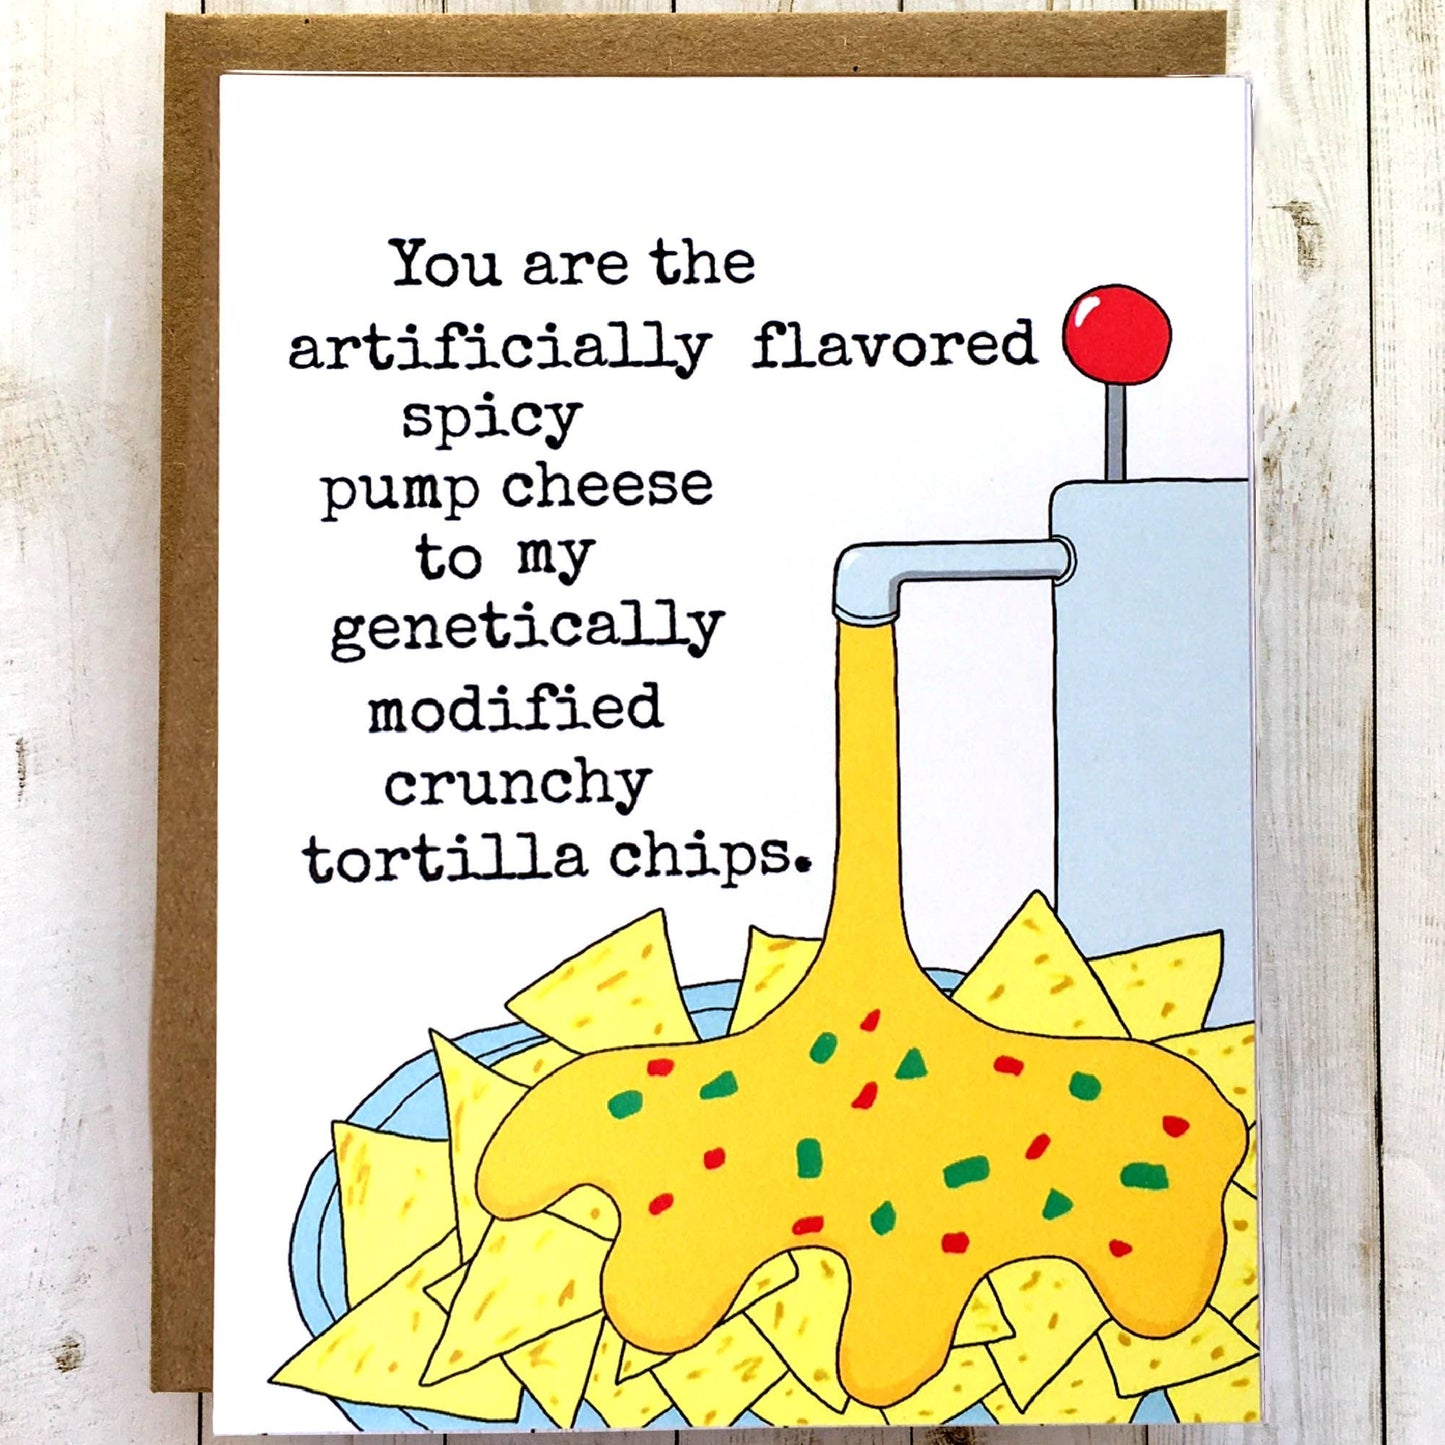 You Are The Artificially Flavored Spicy Nachos and Pump Cheese Greeting Card